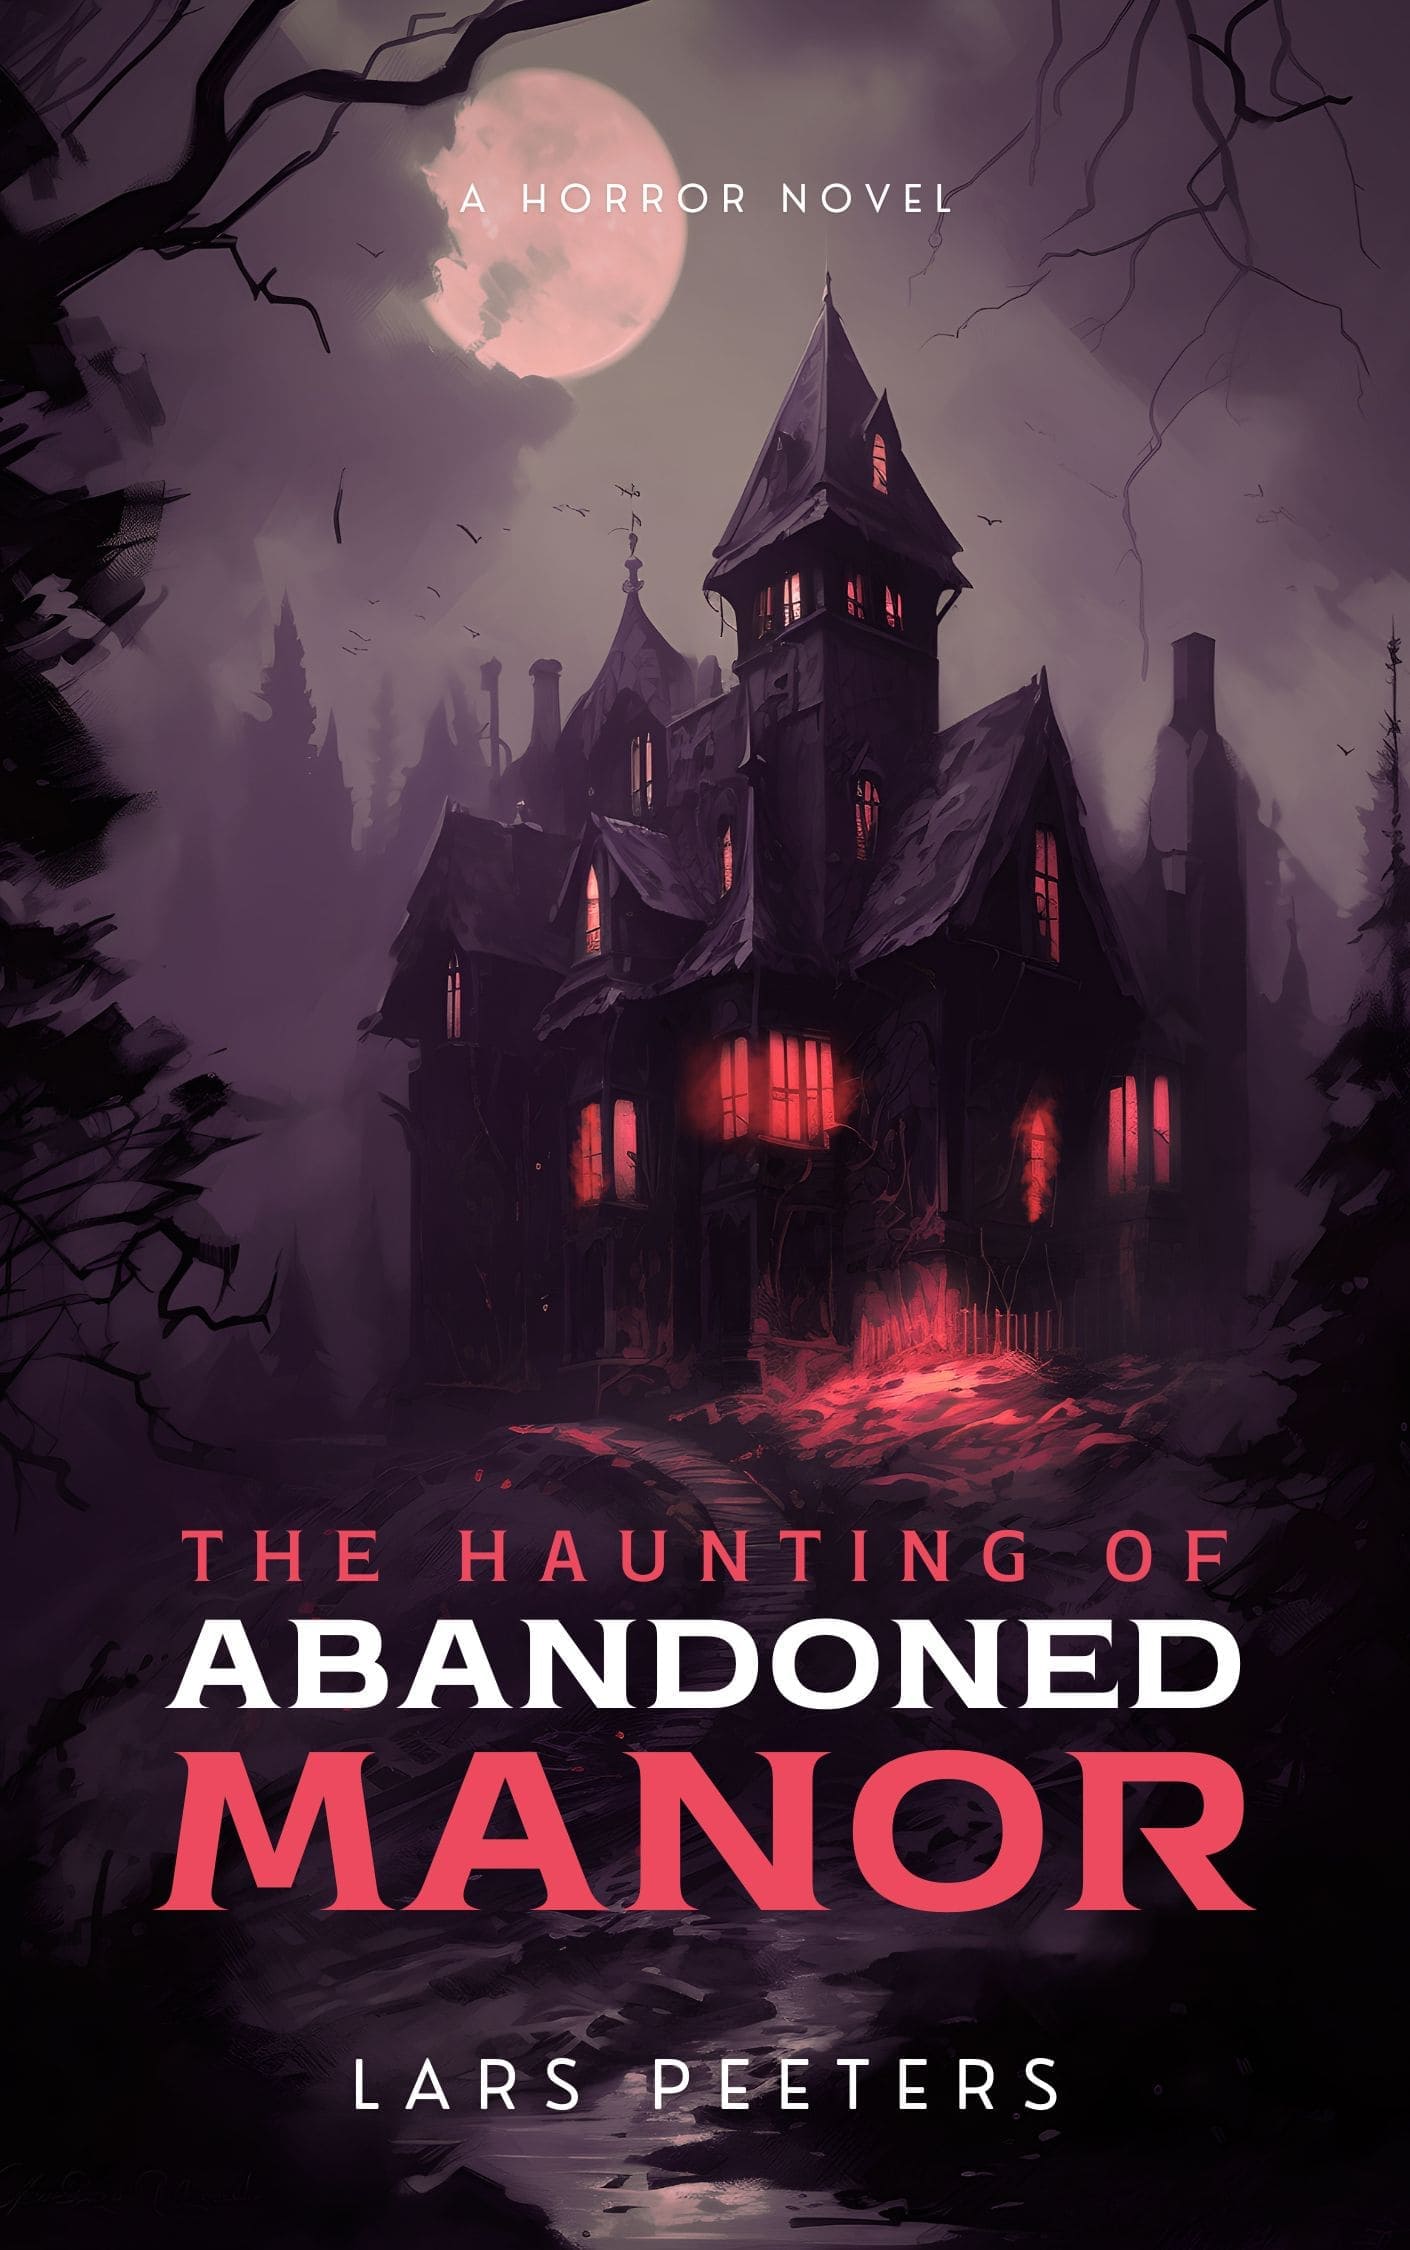 An eerie abandoned manor, shrouded in darkness, evokes a sense of mystery and foreboding.